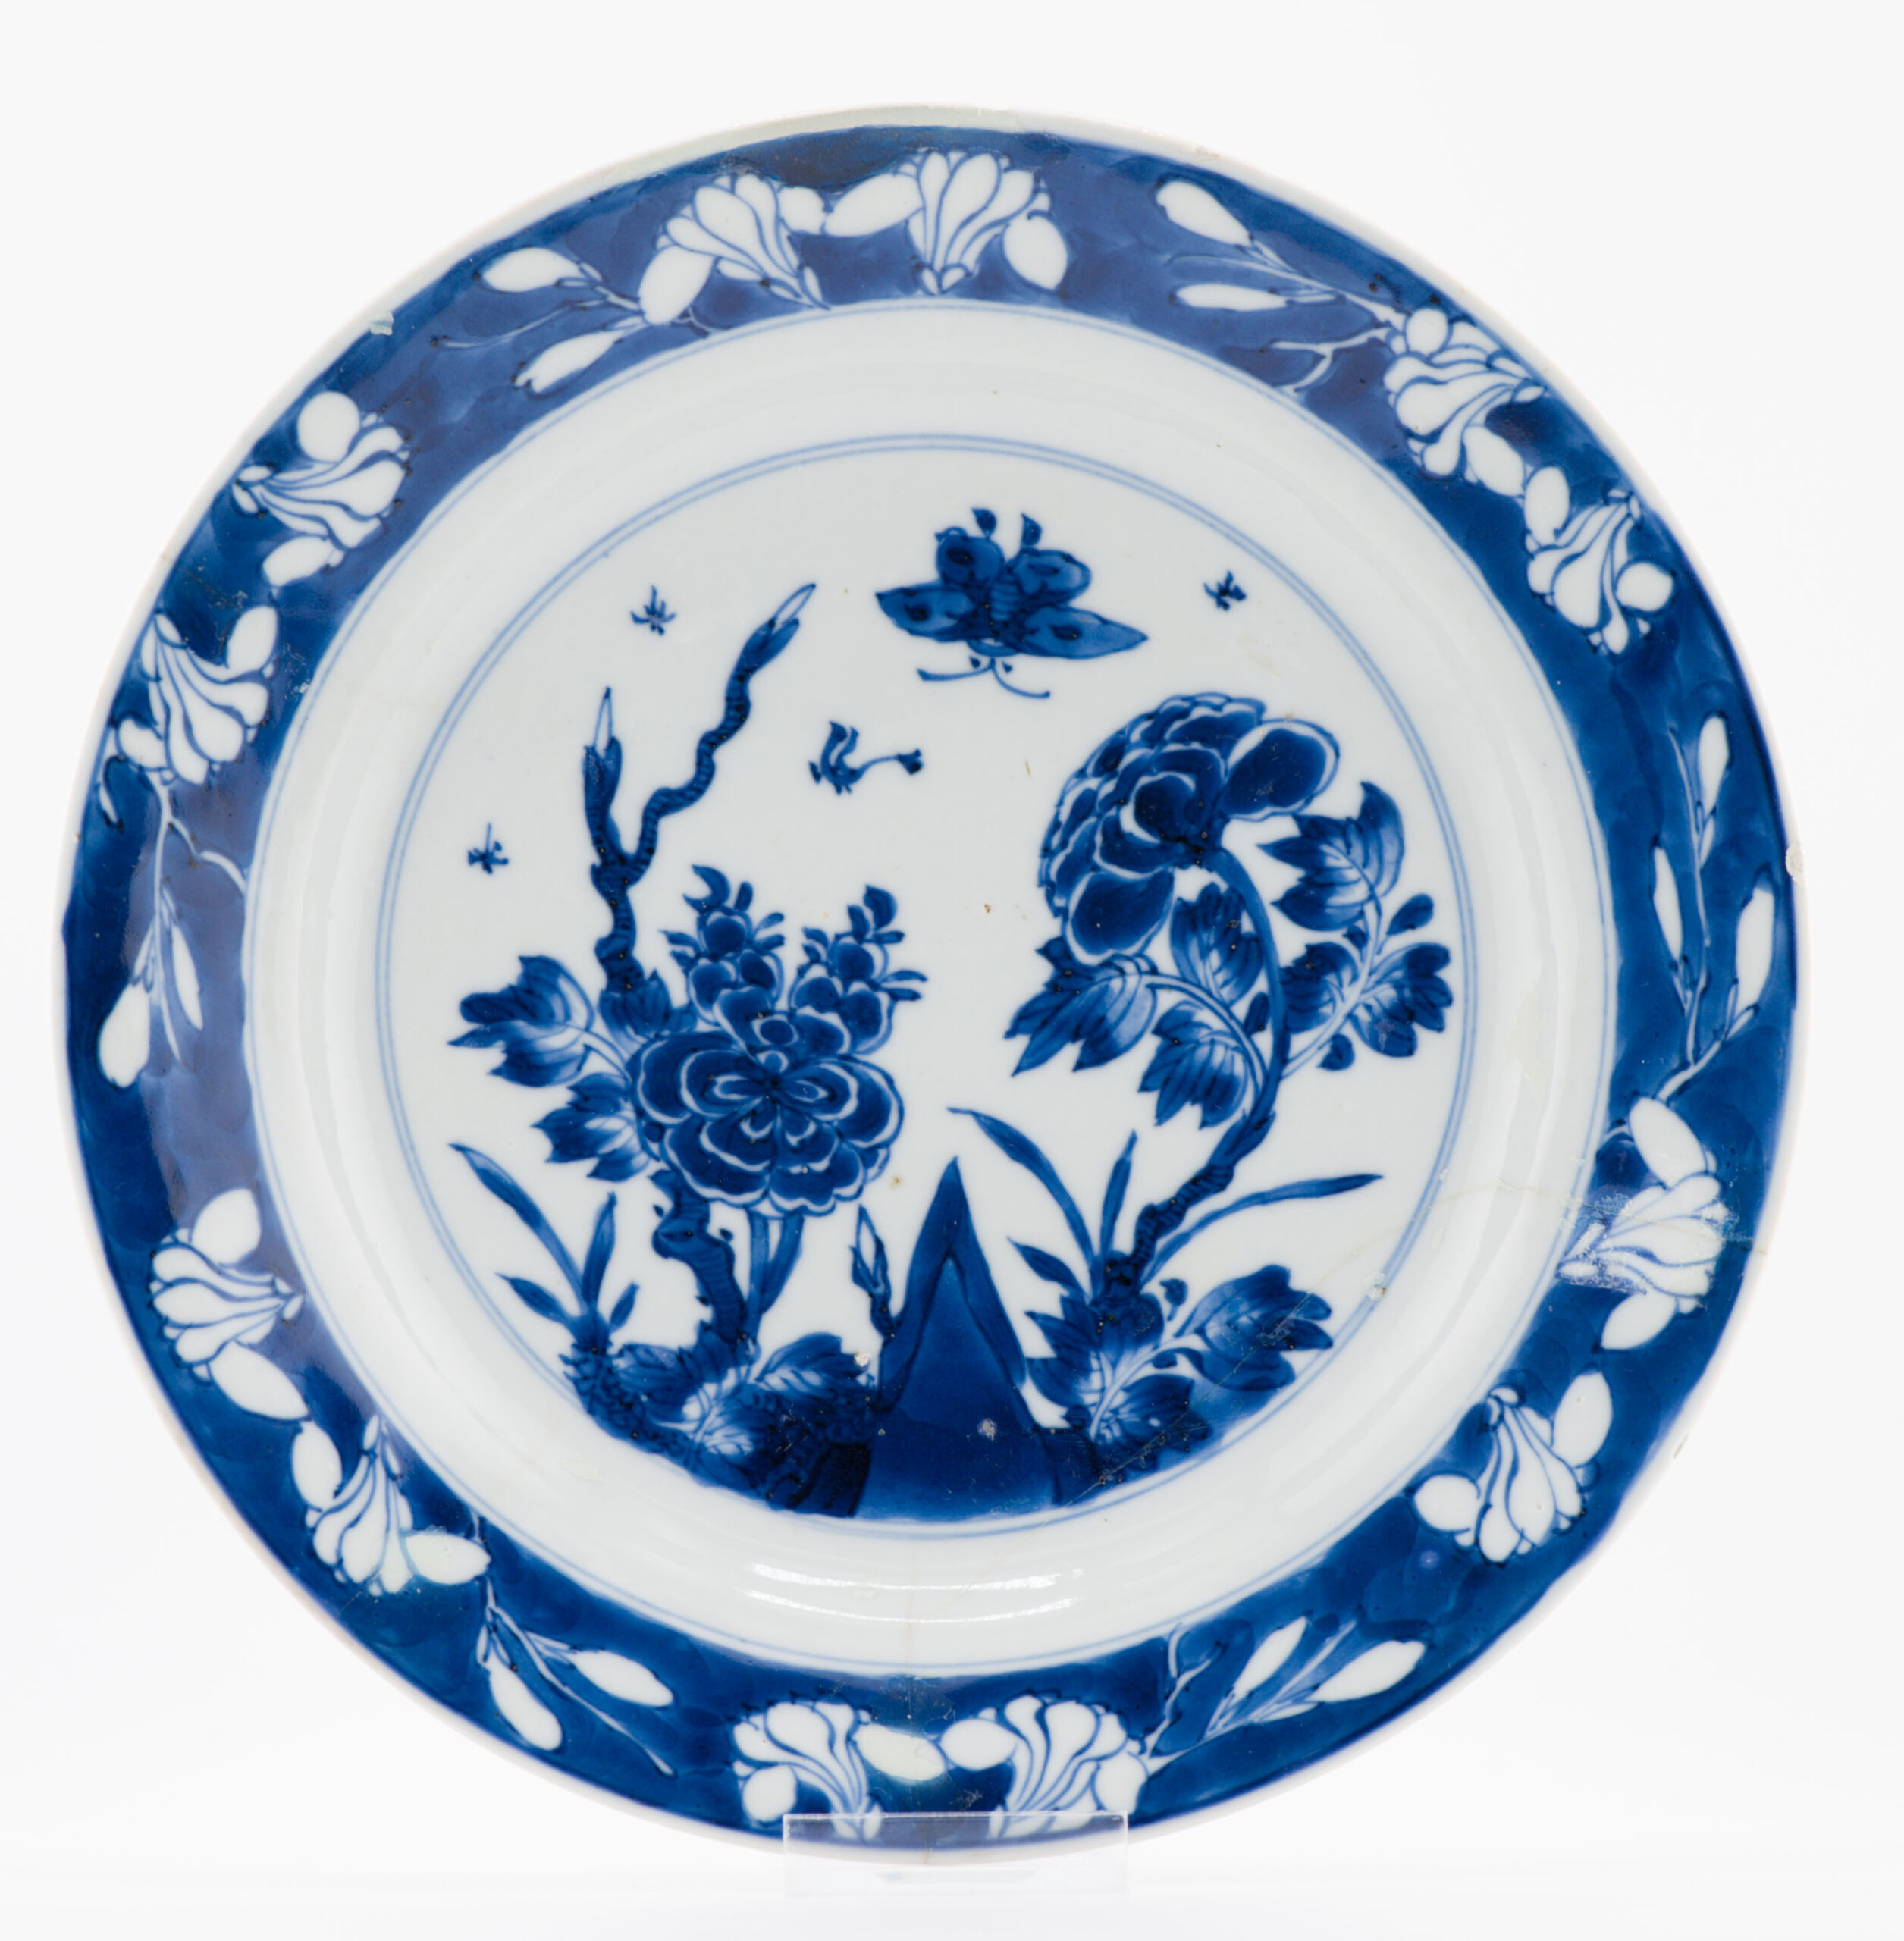 1336 Lovely cobalt blue plate with Buttefly and flowers. Very much in Ming style on the rim and base